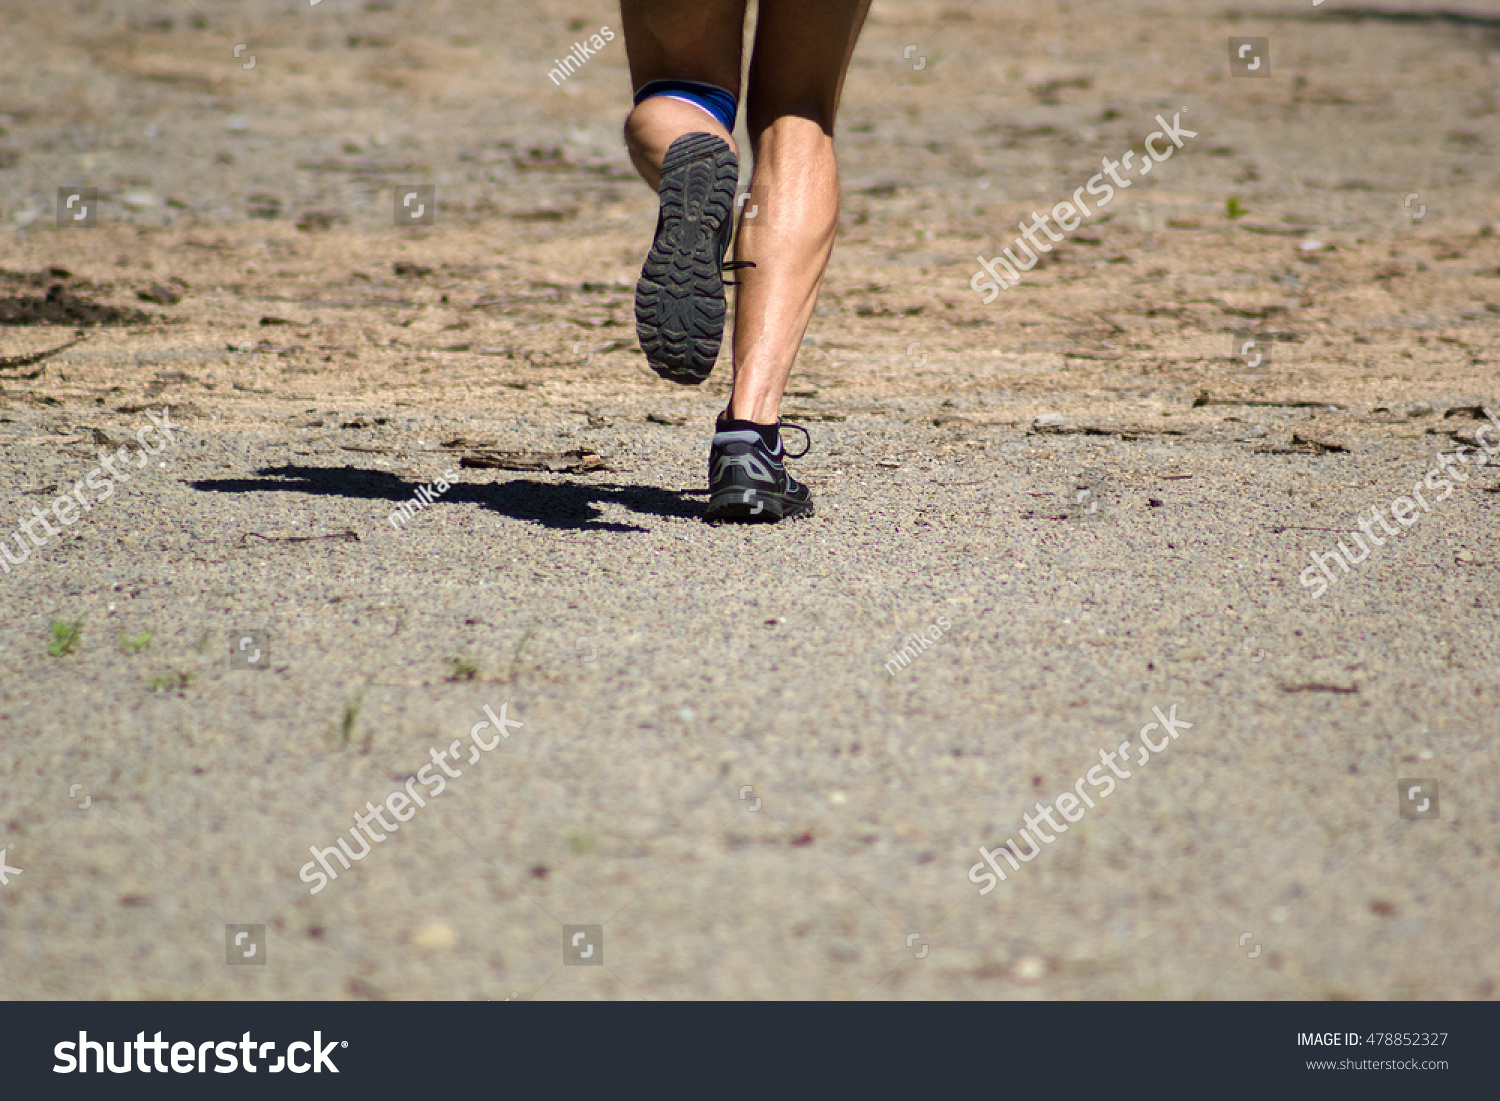 Athletic male feet running on dirt road #478852327